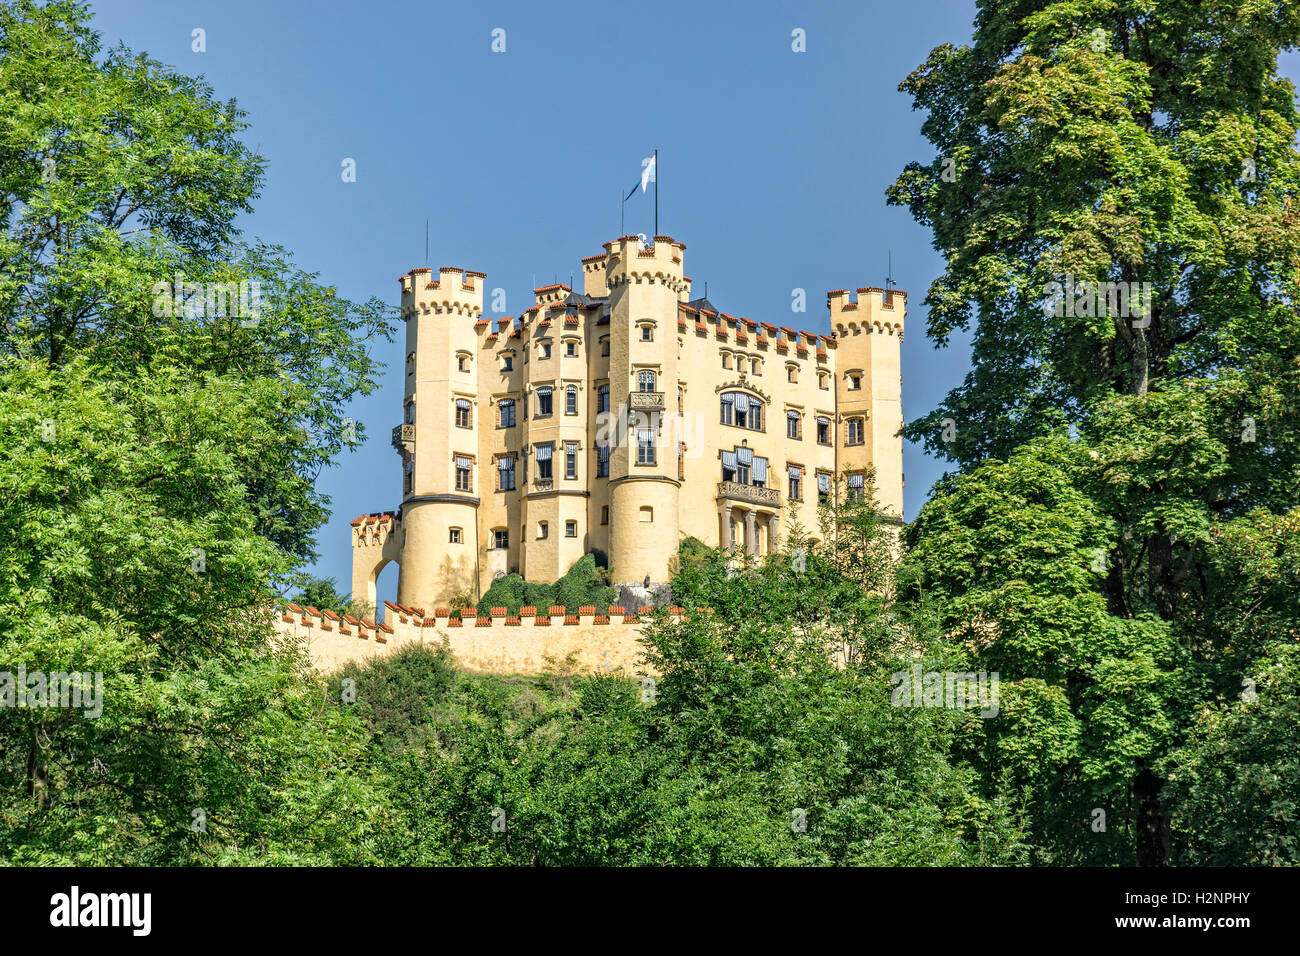 The castle 'Hohenschwangau' in Germany surrounded by trees. Stock Photo